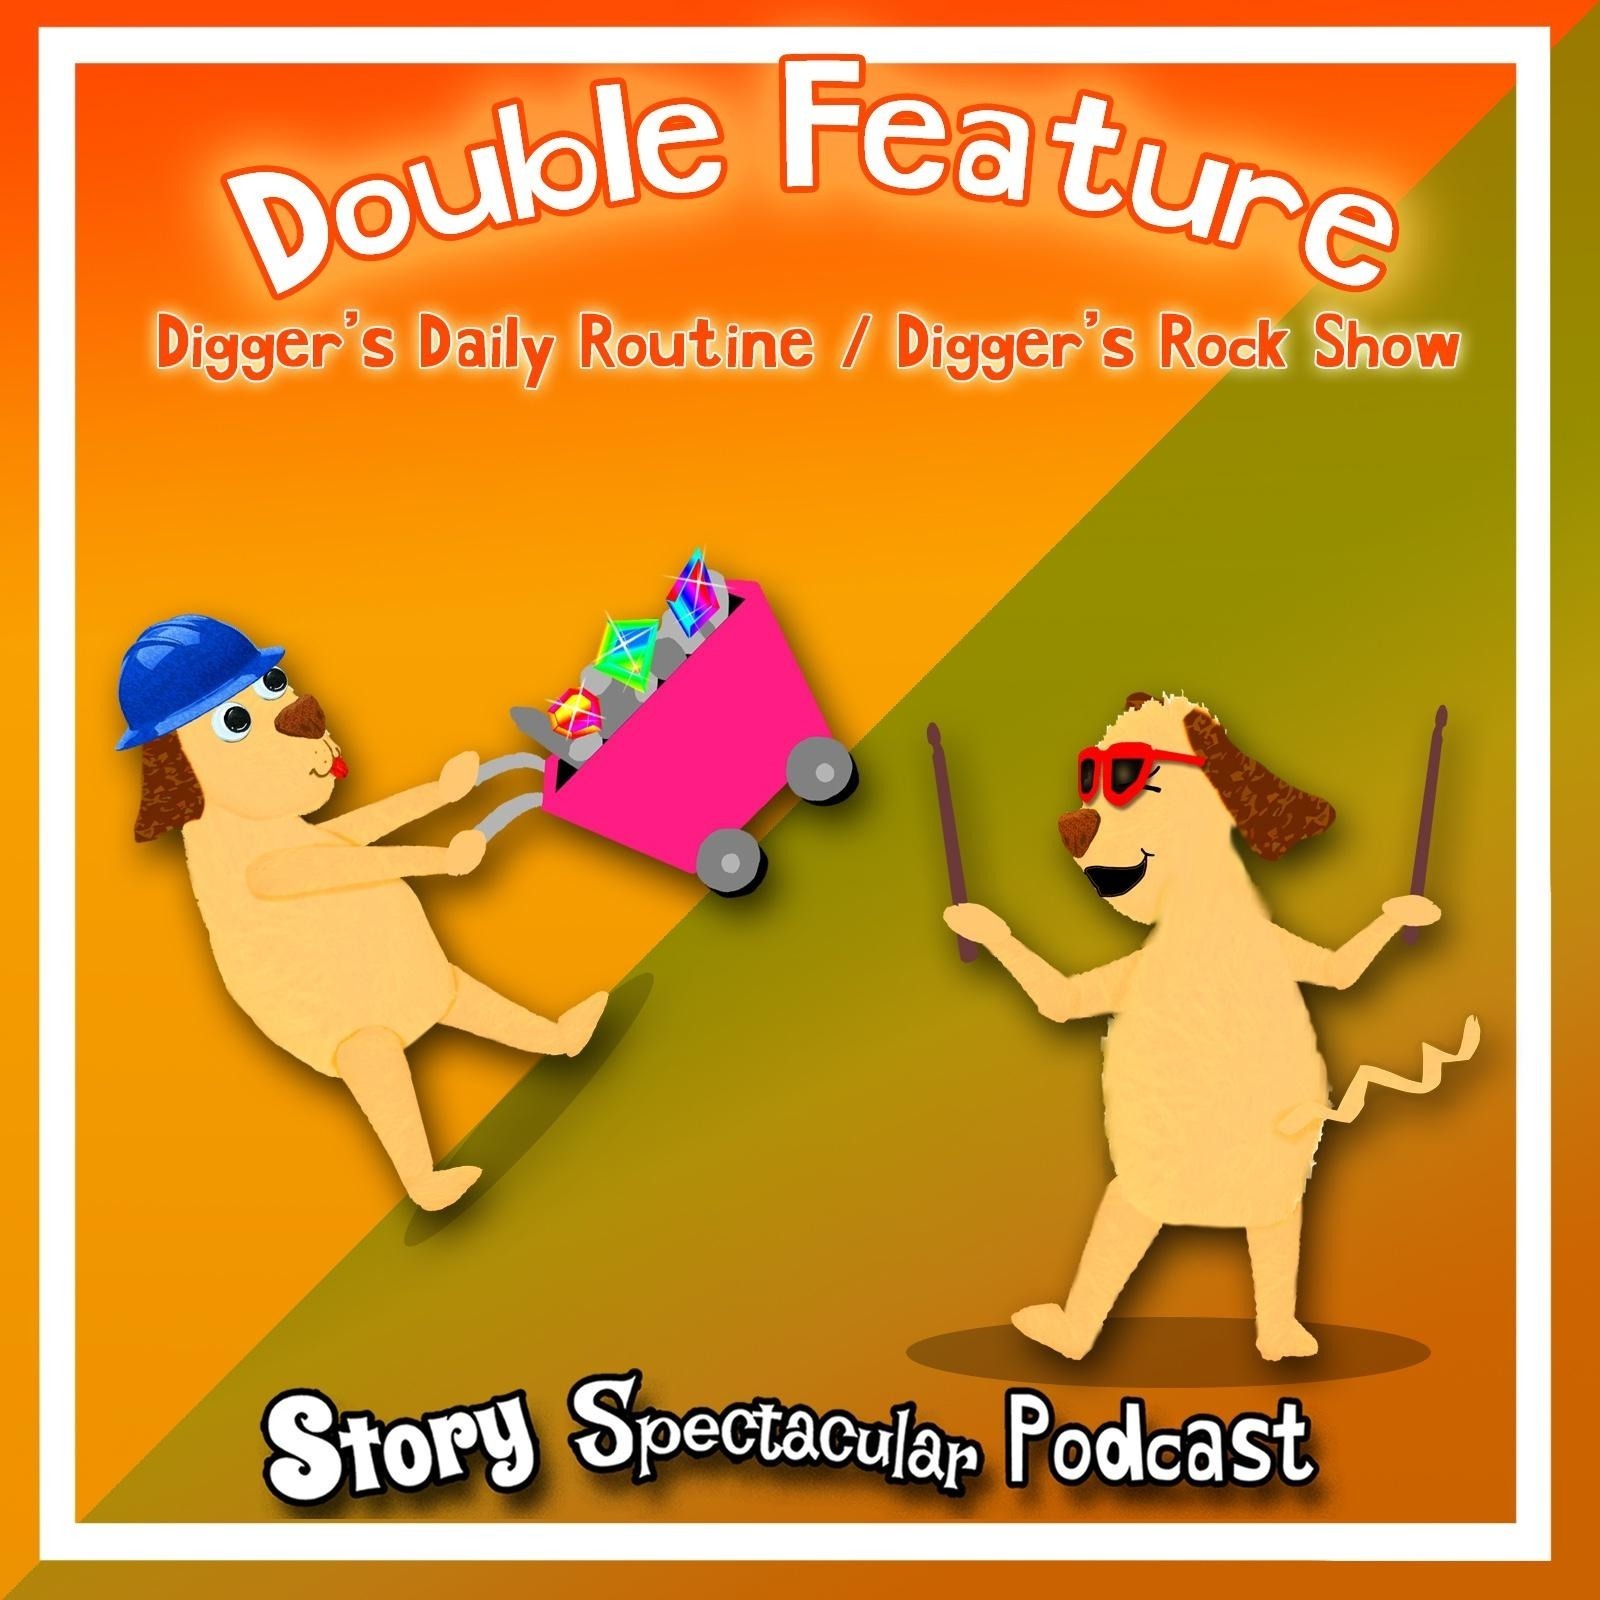 Double Feature: Digger's Daily Routine / Digger's Rock Show